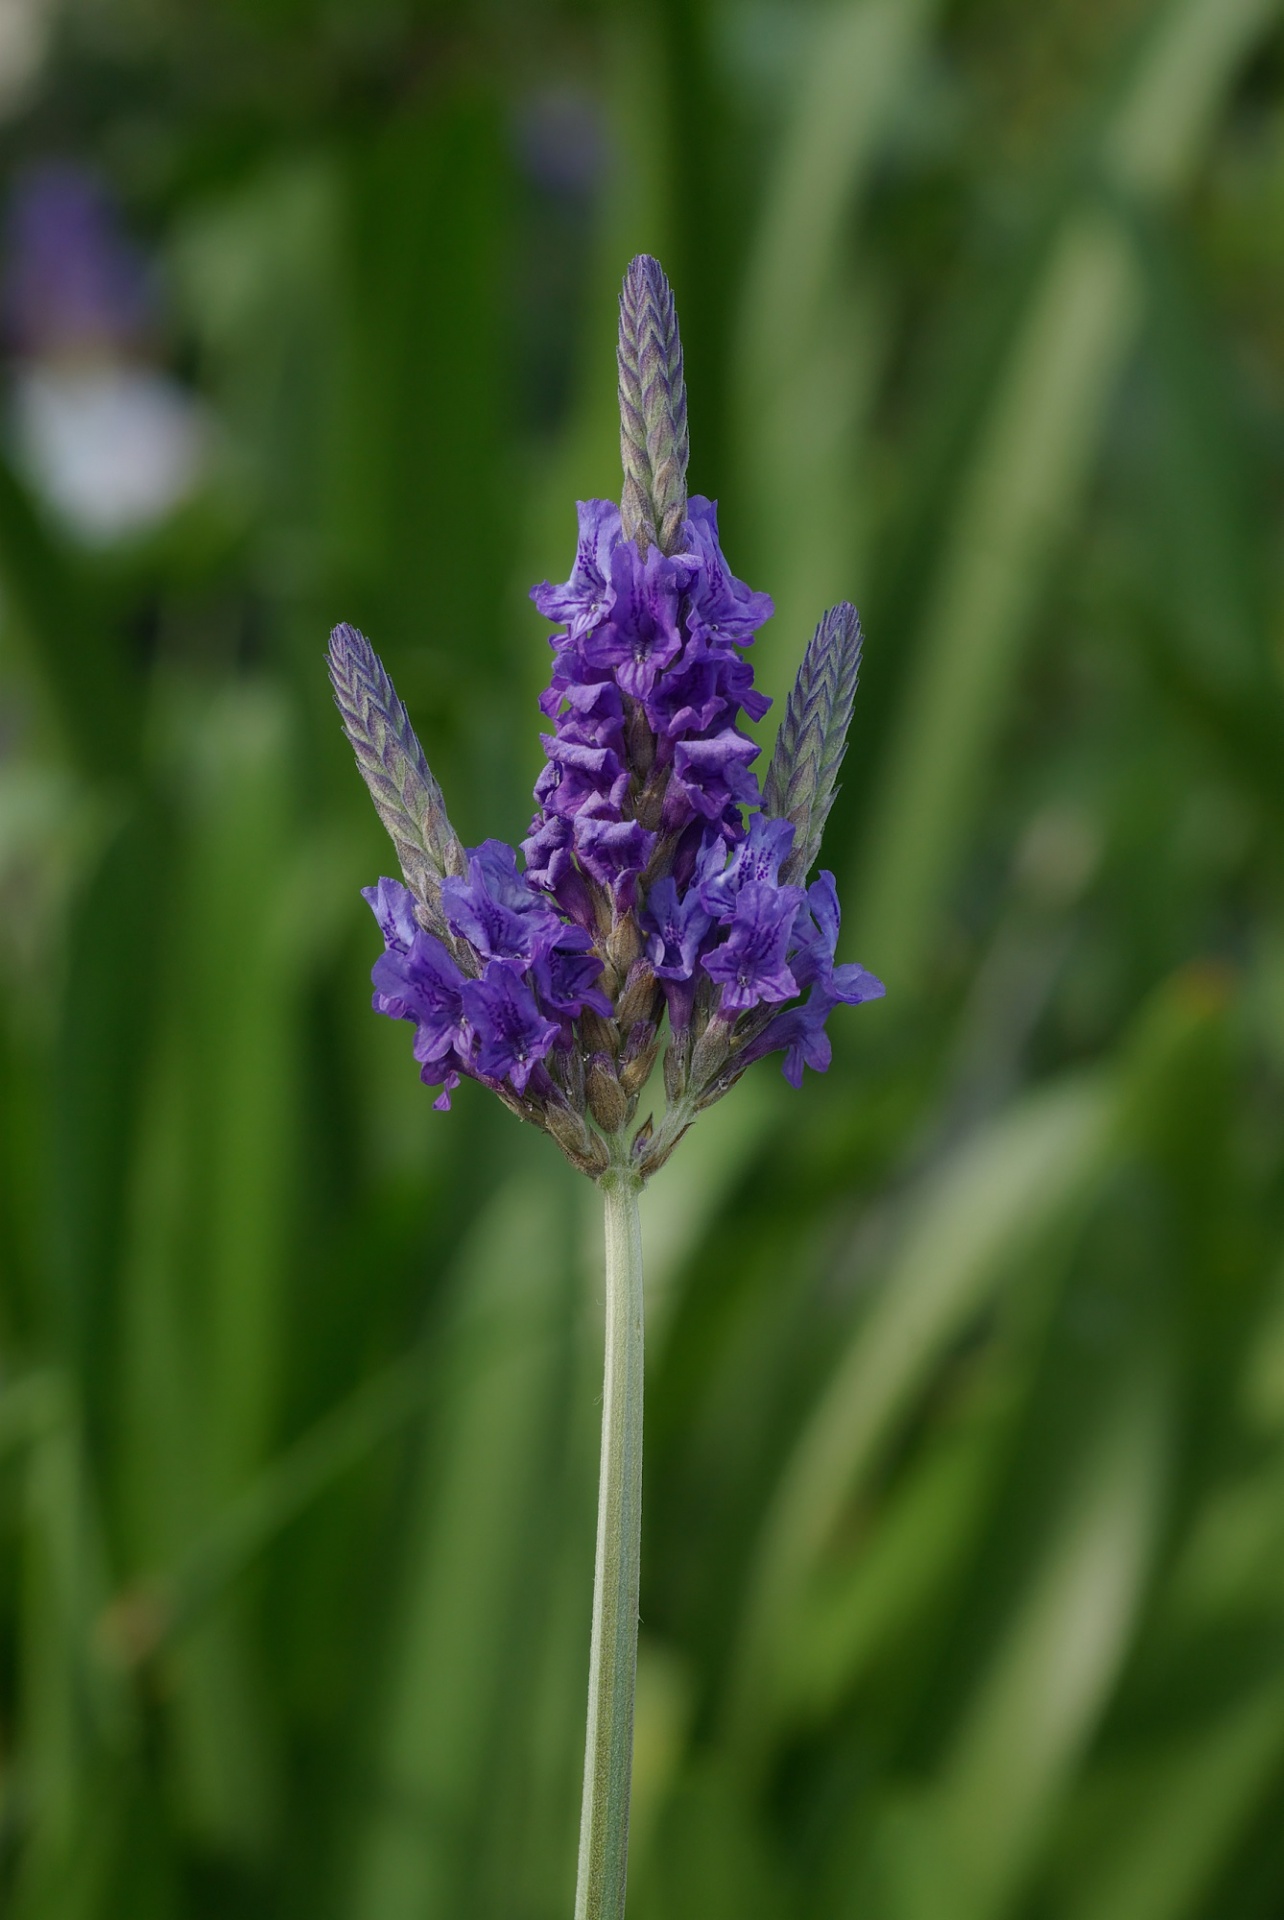 Macro view of a lavender plant